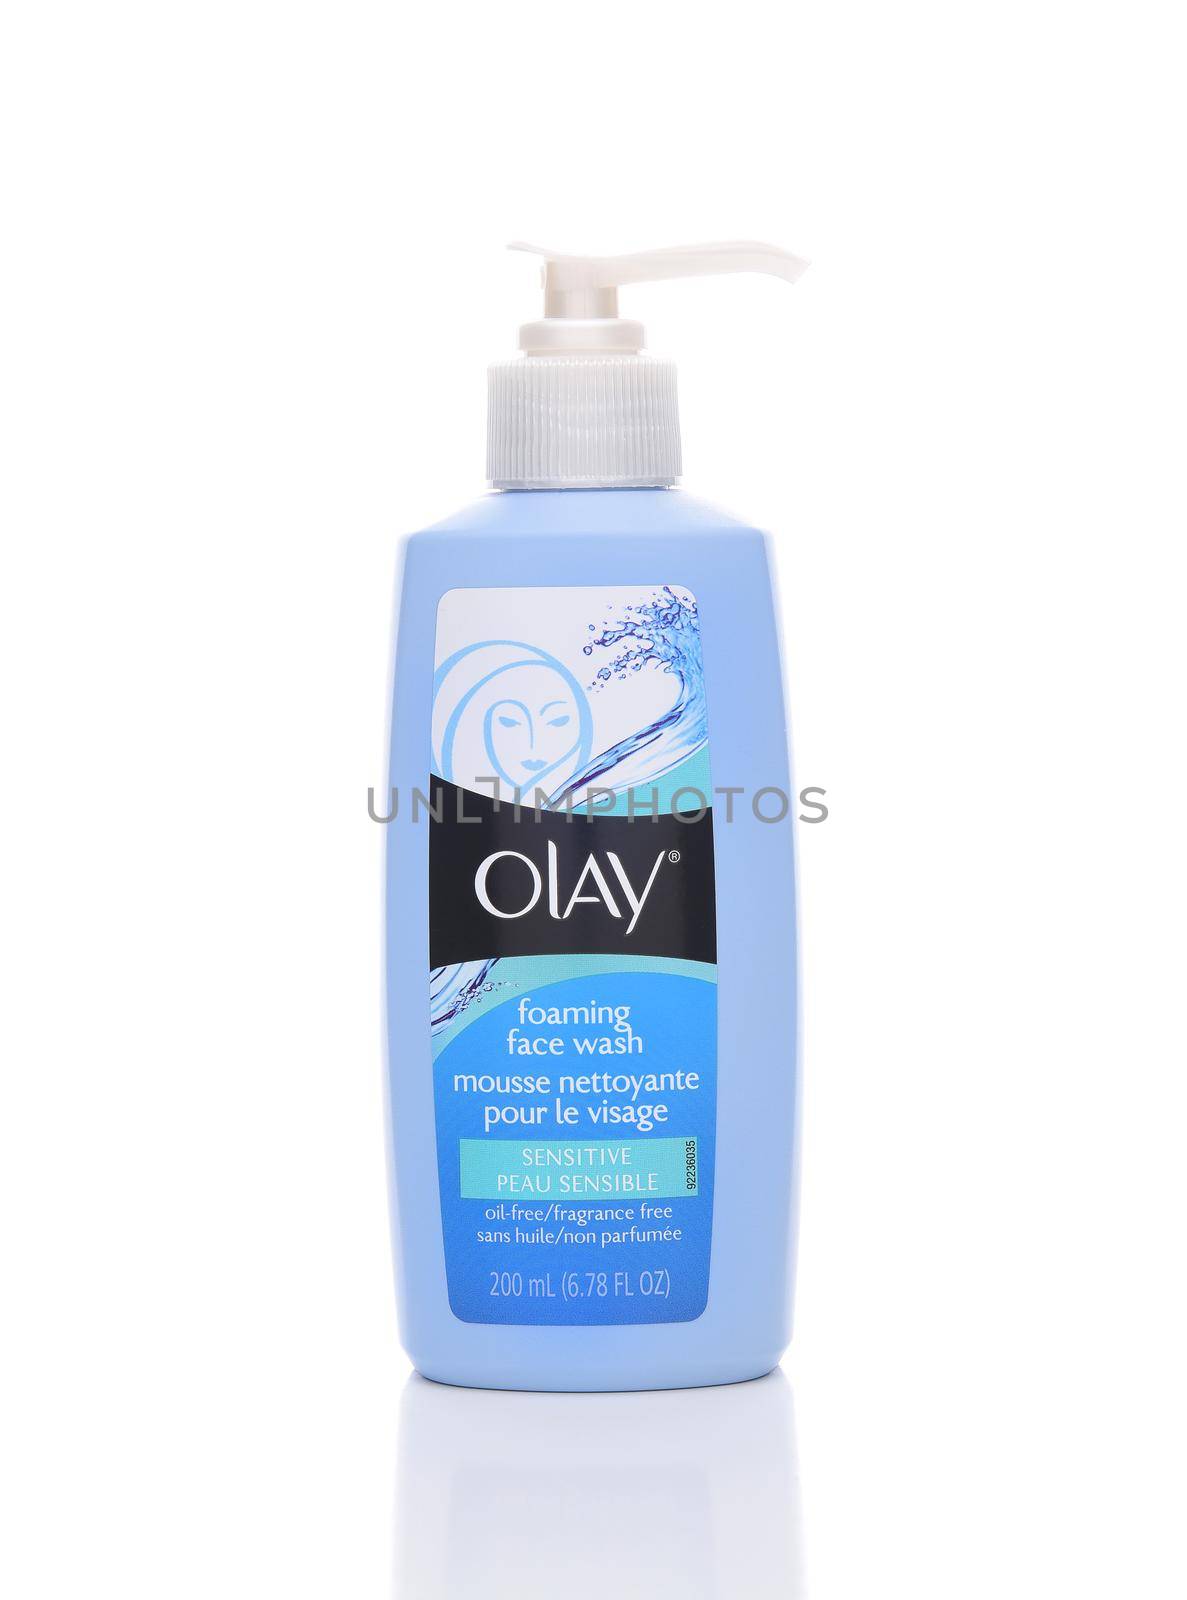 IRVINE, CALIFORNIA - JANUARY 22, 2017: Olay Foaming Face Wash. Olay produces a line of hypoallergenic cleansers and creams for all skincare needs.